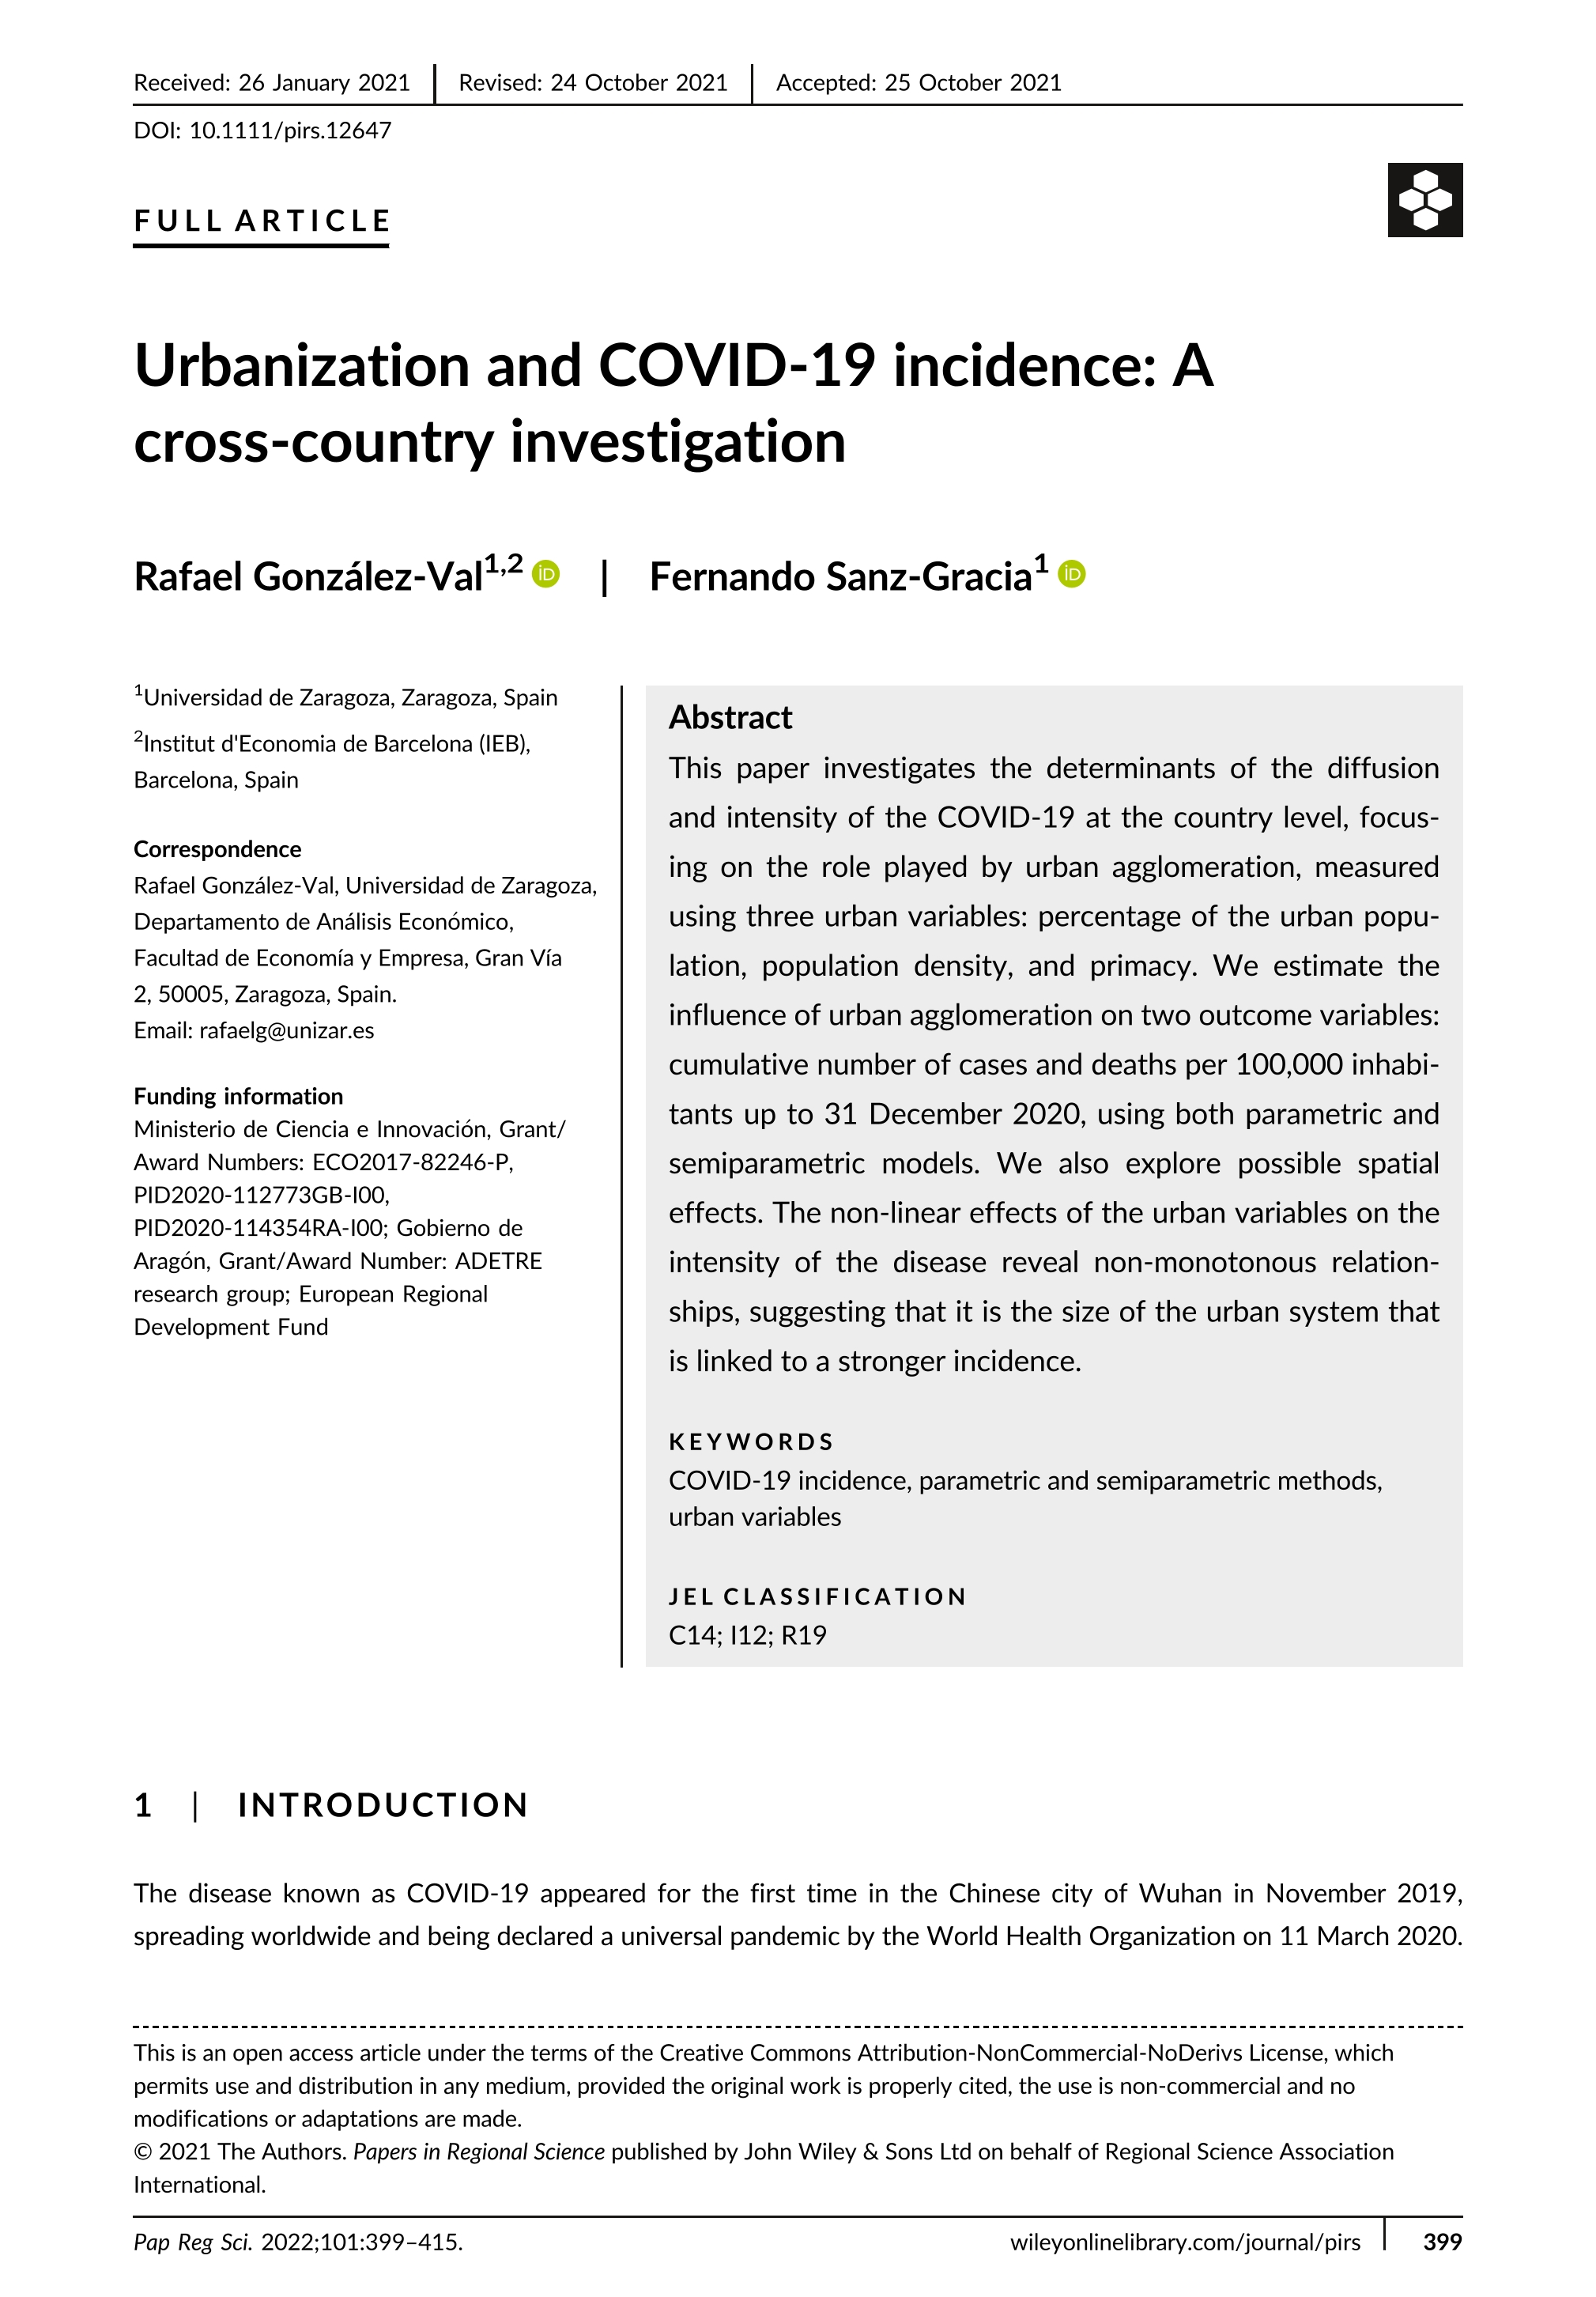 Urbanization and COVID-19 incidence: A cross-country investigation